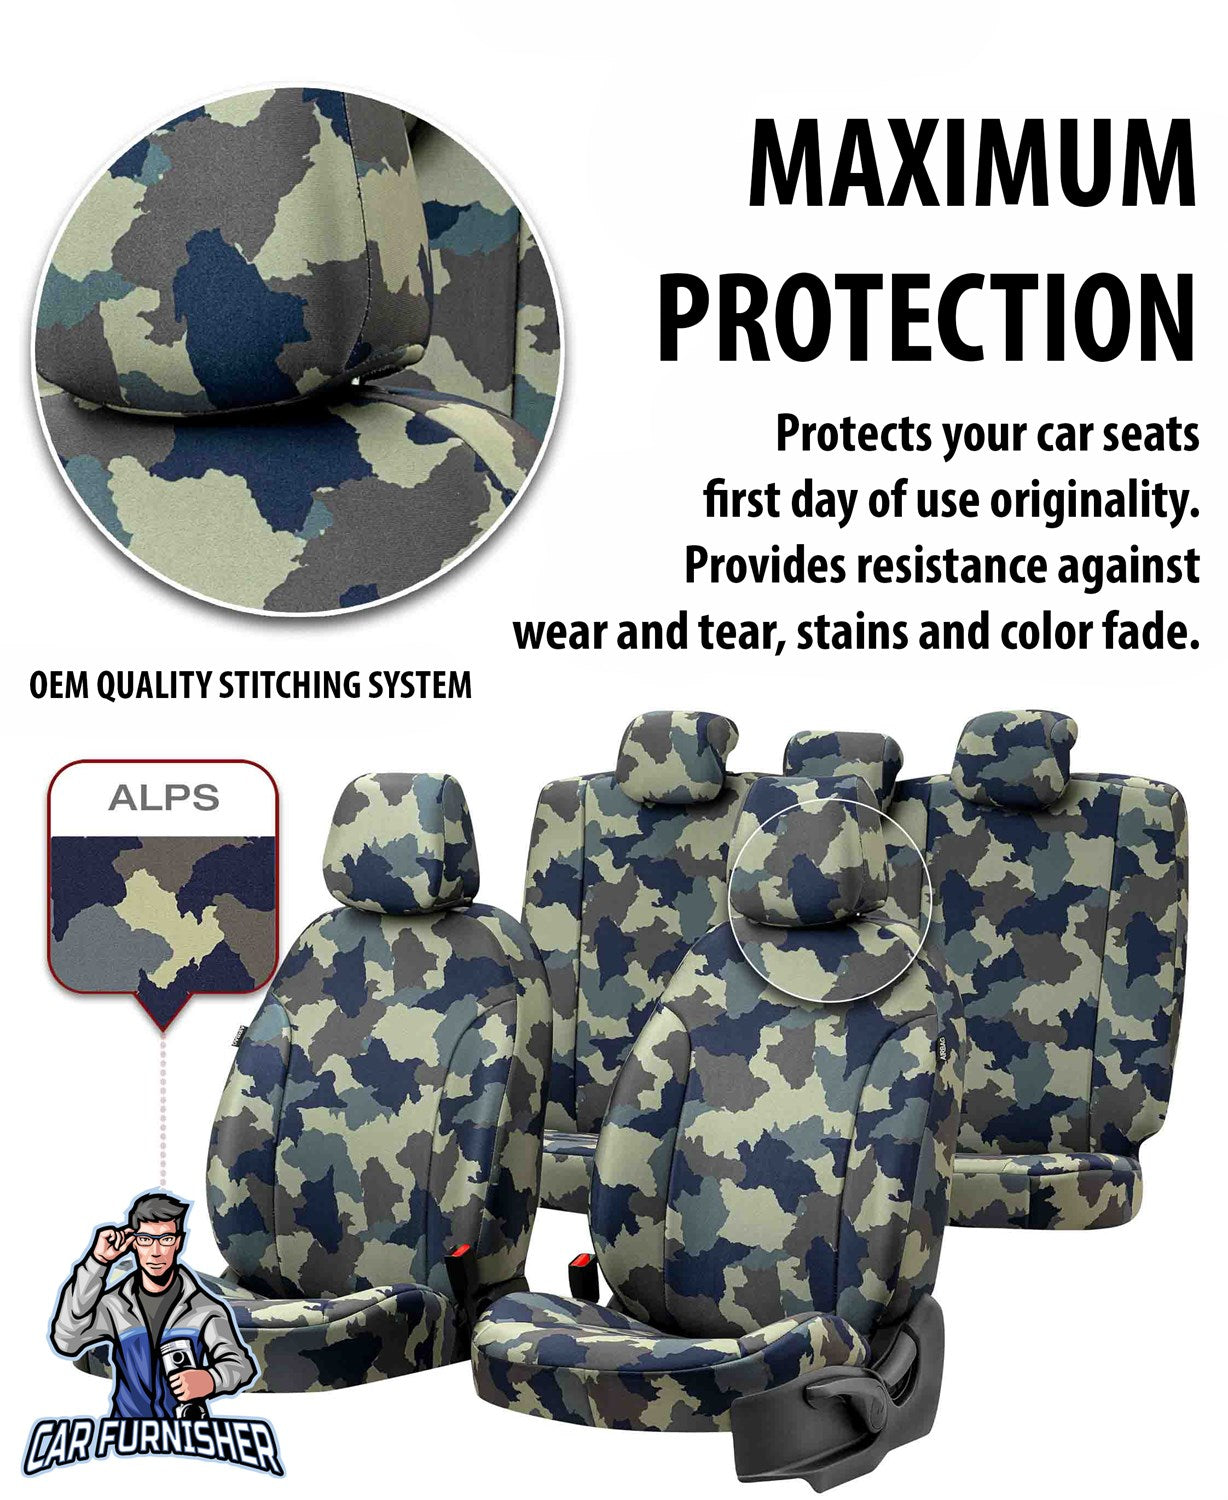 Ford Focus Seat Covers Camouflage Waterproof Design Arctic Camo Waterproof Fabric